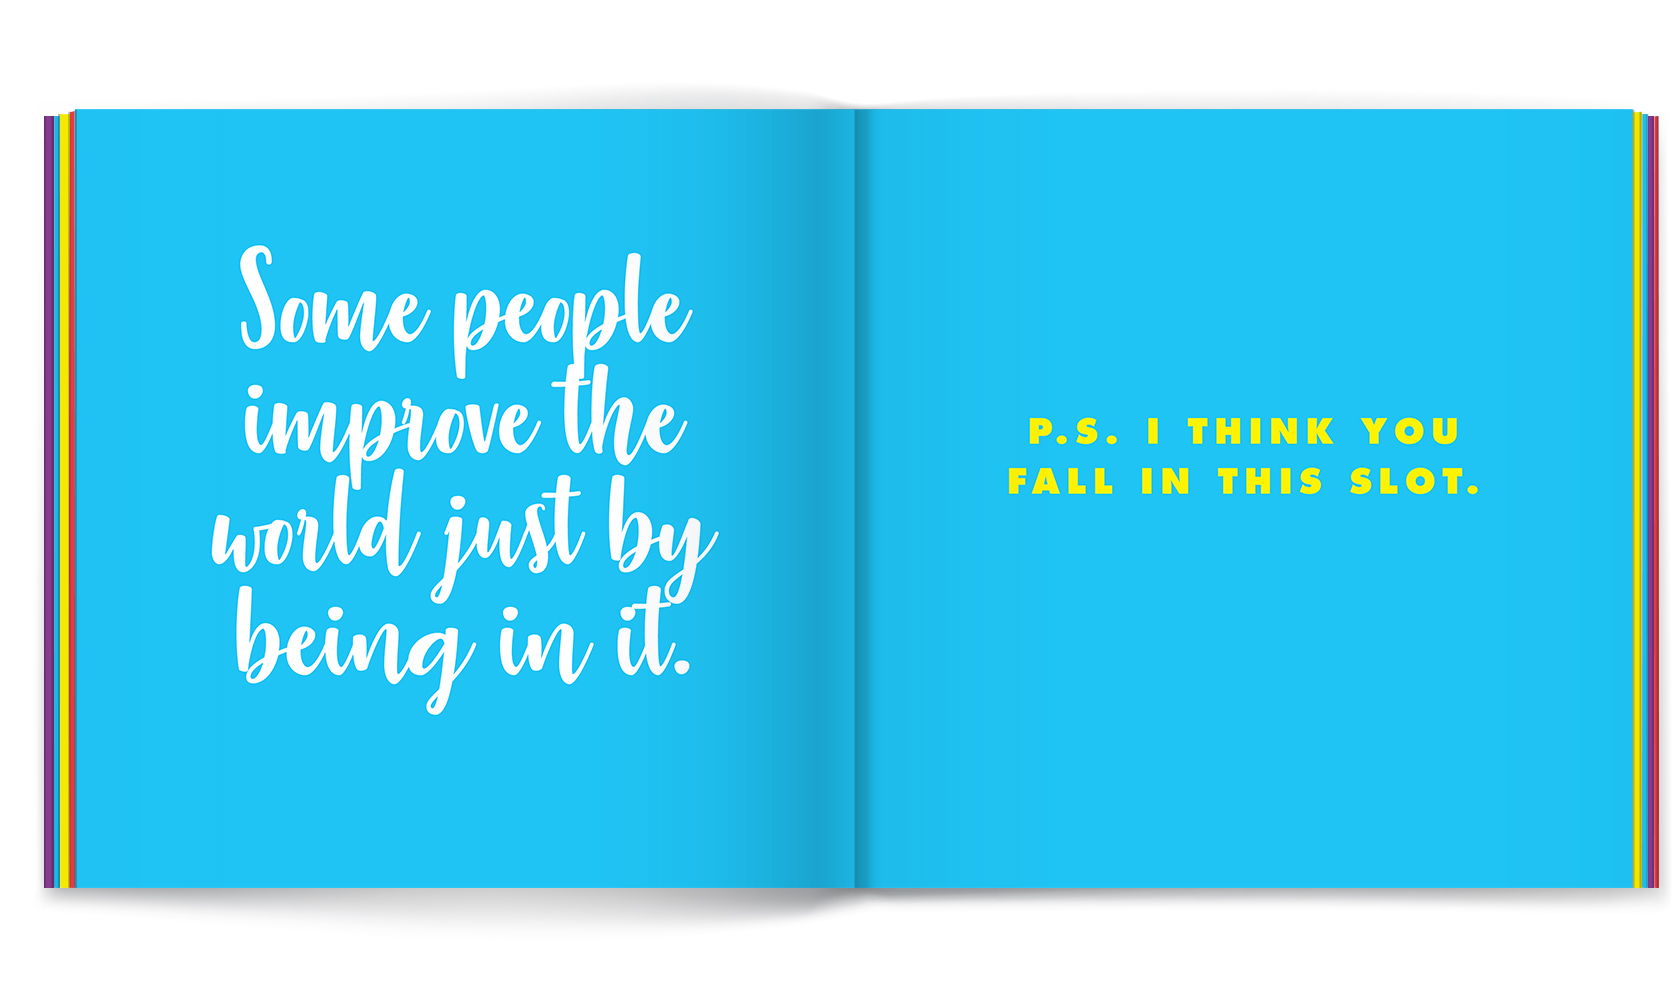 Book quote: Some people improve the world just by being in it. P.S. I think you fall in this slot.